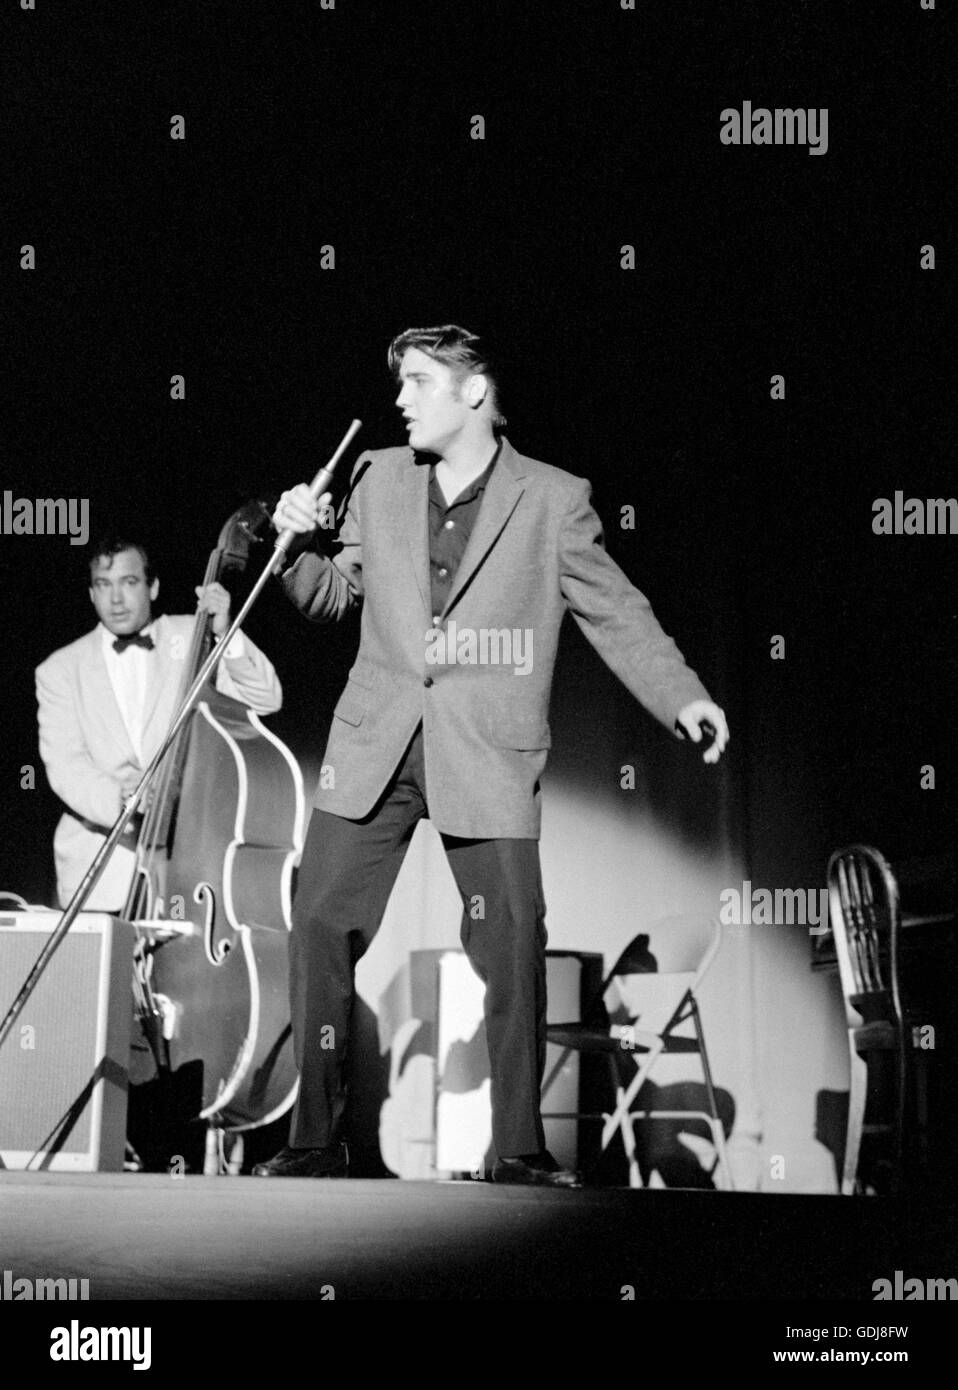 Elvis Presley, performing on stage, May 26, 1956. Stock Photo